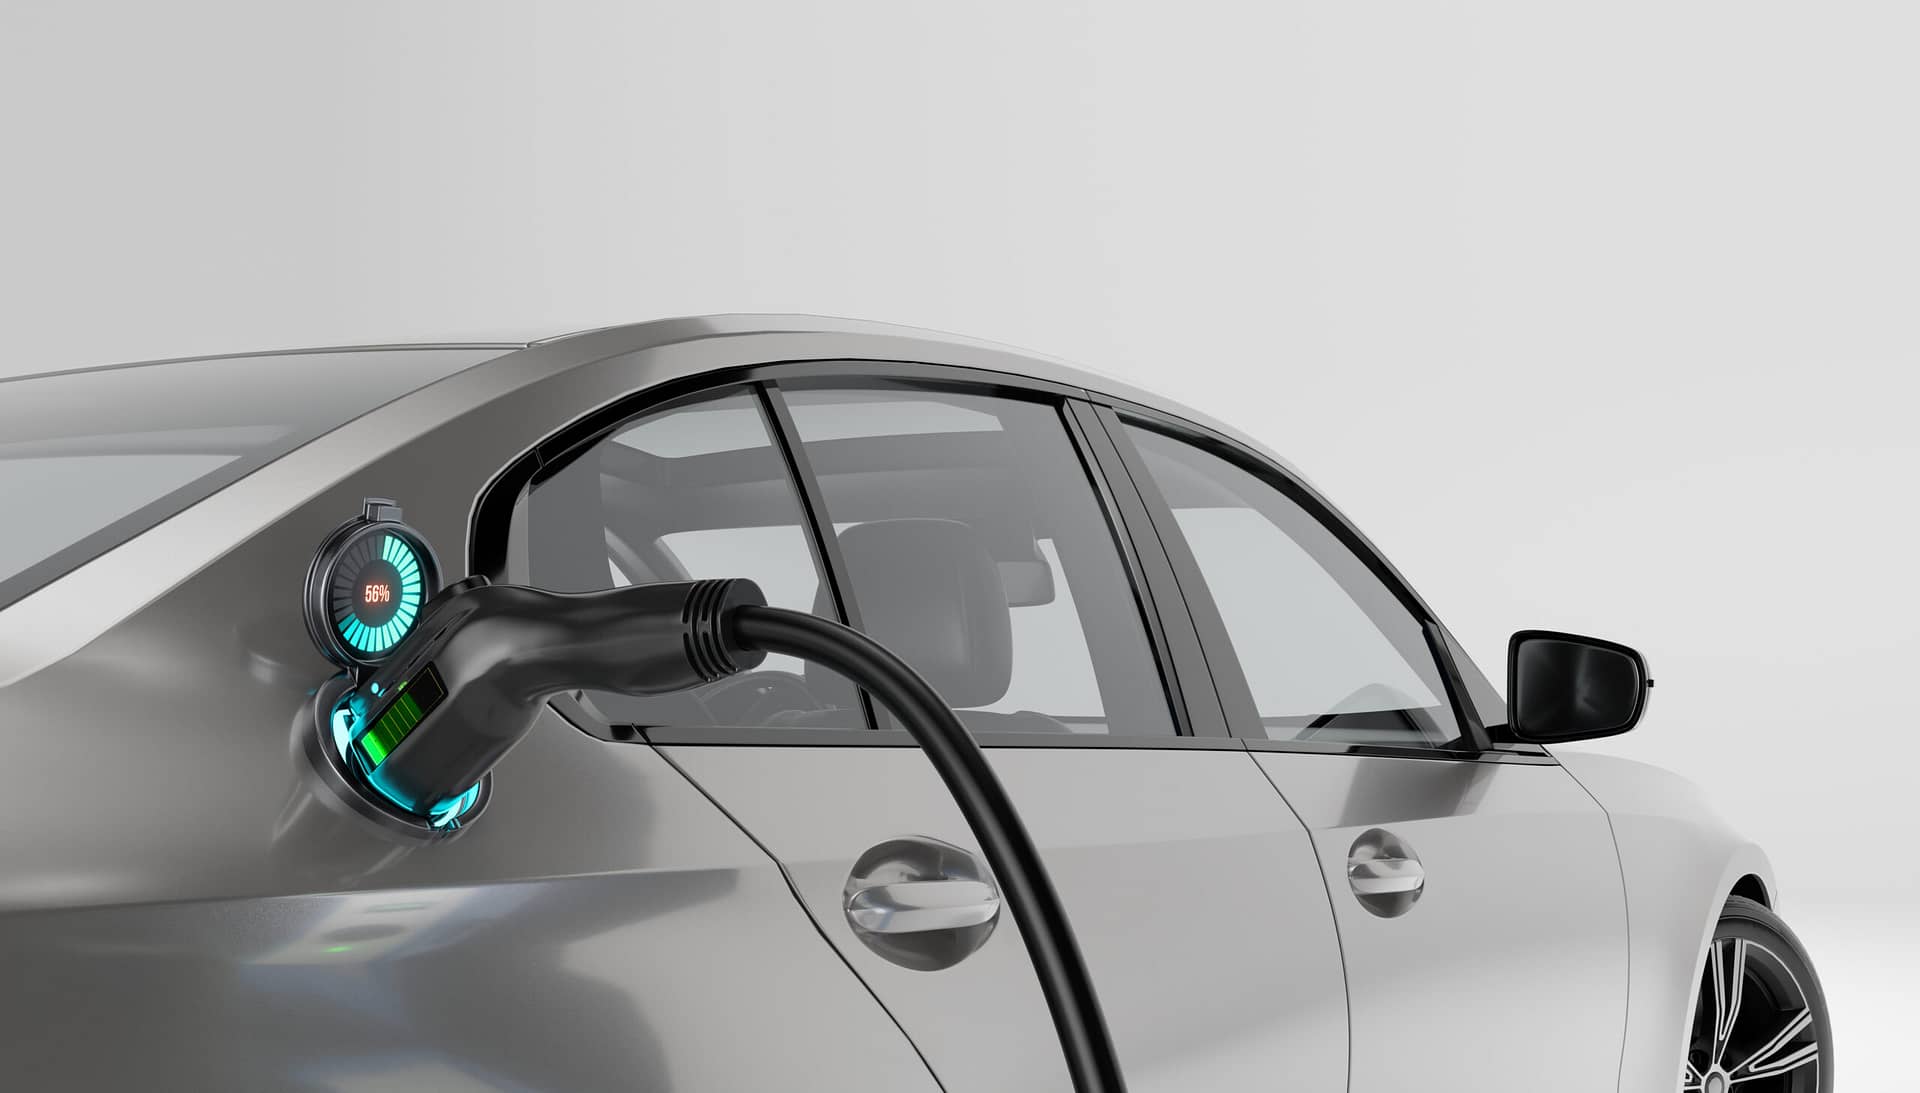 EV charging and energy storage